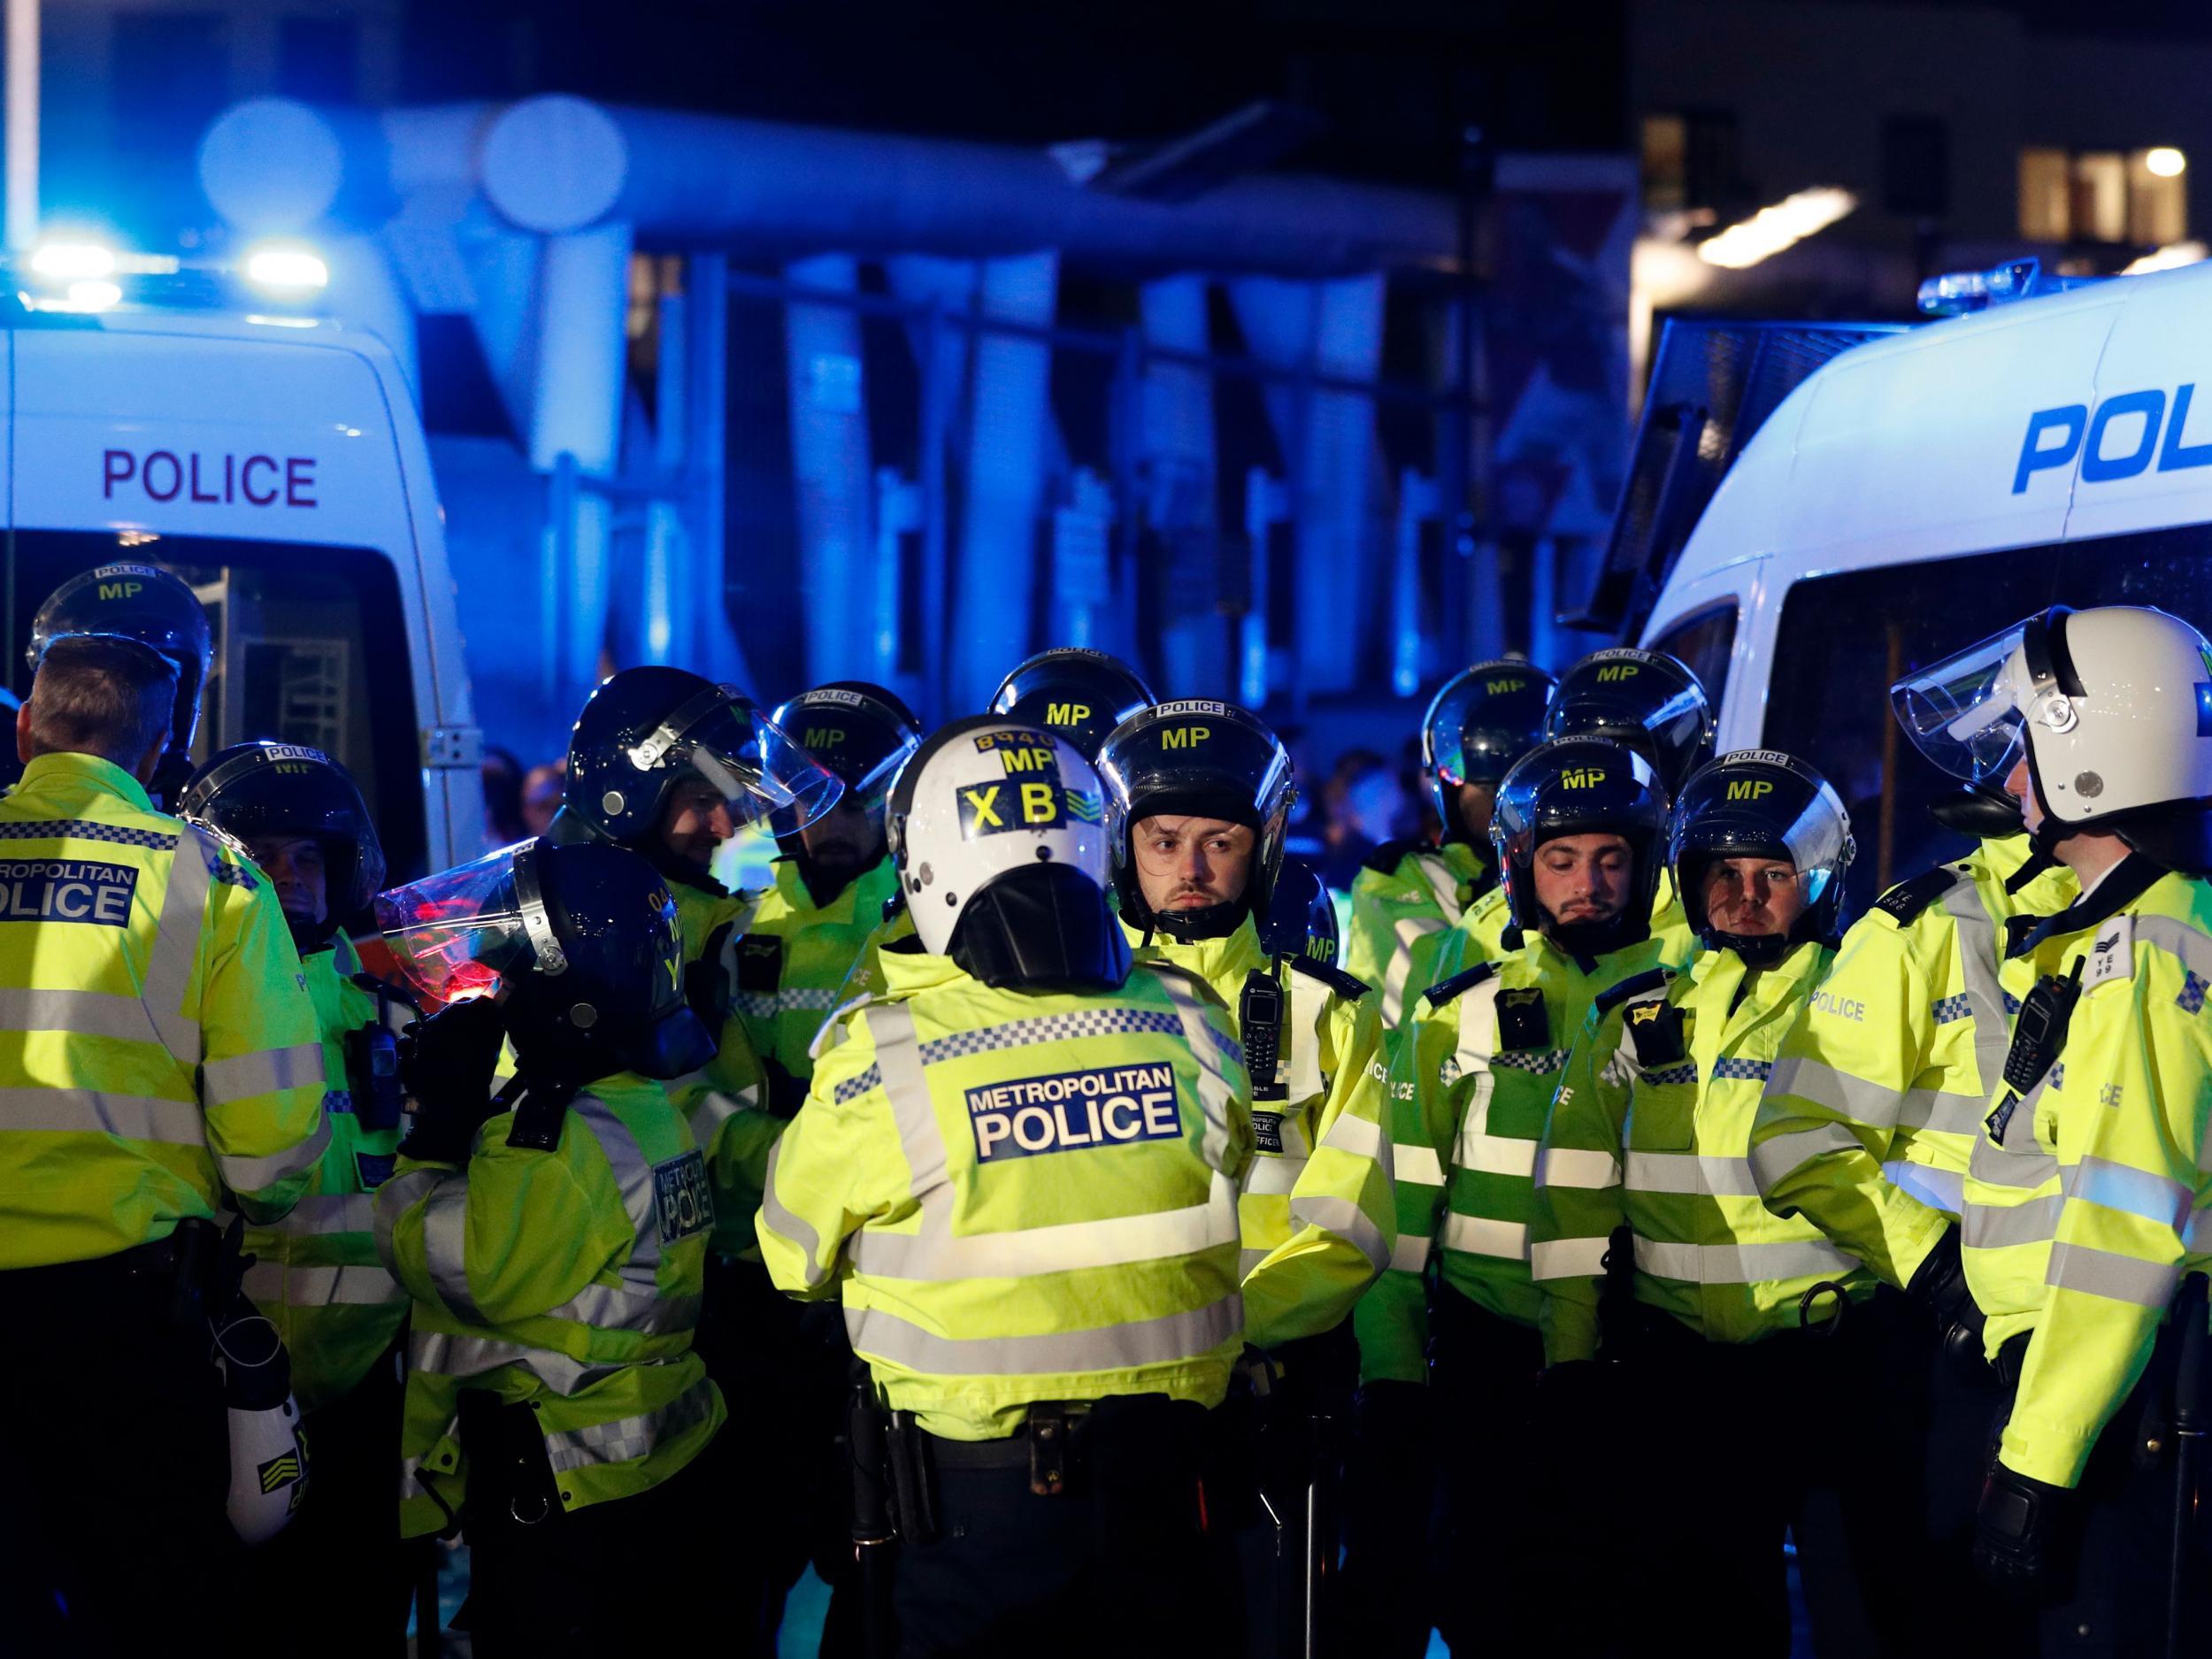 Riot police arrive outside the Emirates Stadium as kick off is delayed due to crowd safety issues